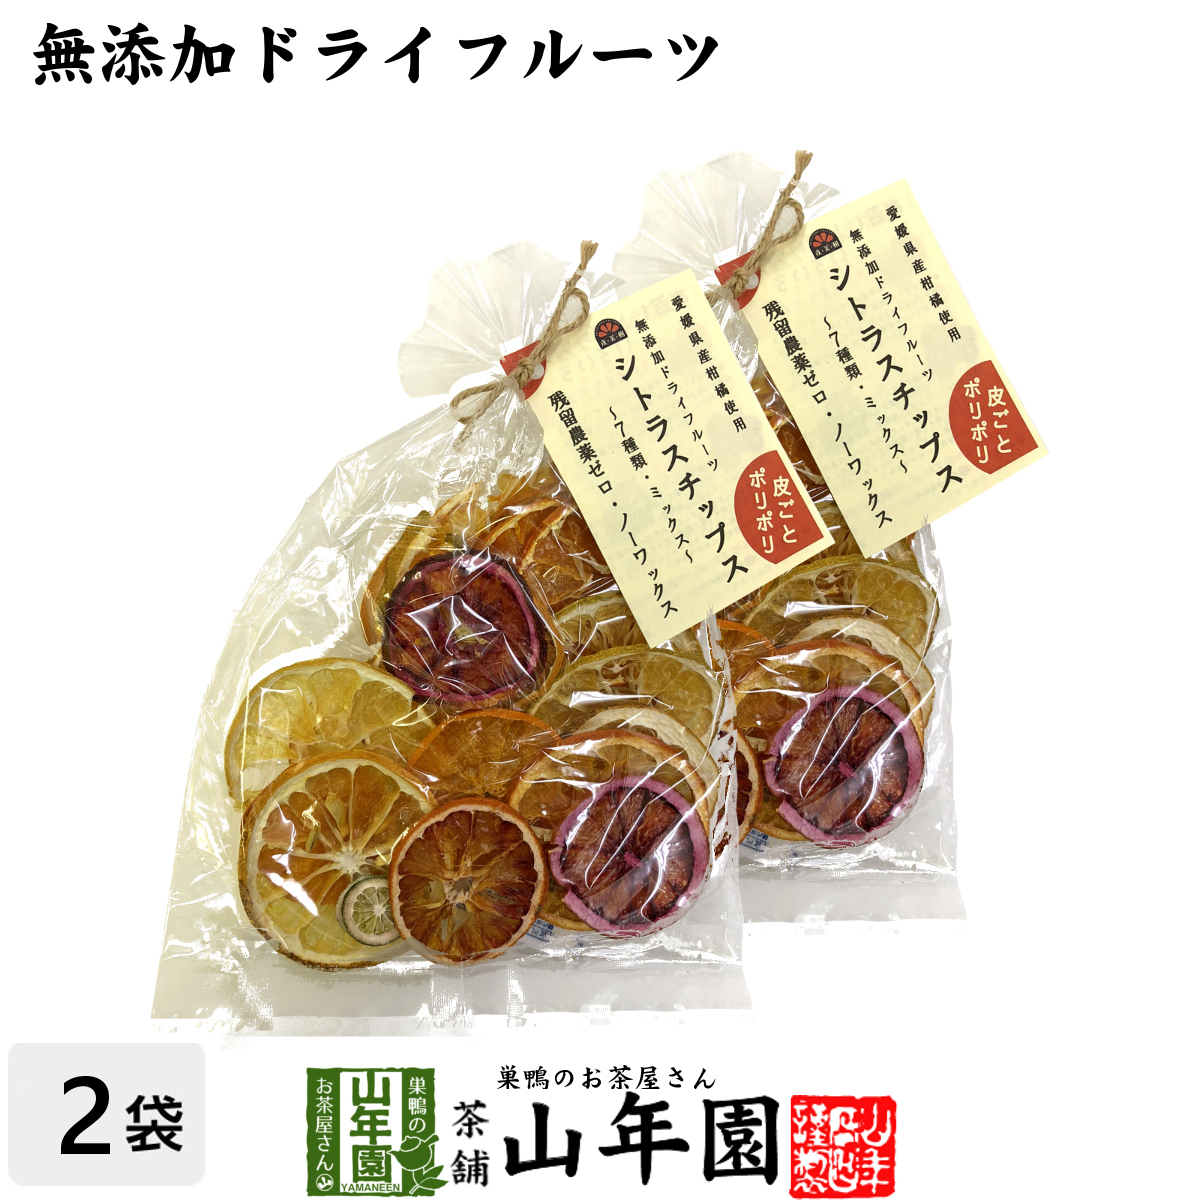  health food no addition dried fruit citrus chip s50g×2 sack set Ehime prefecture production. 7 kind ... use free shipping f